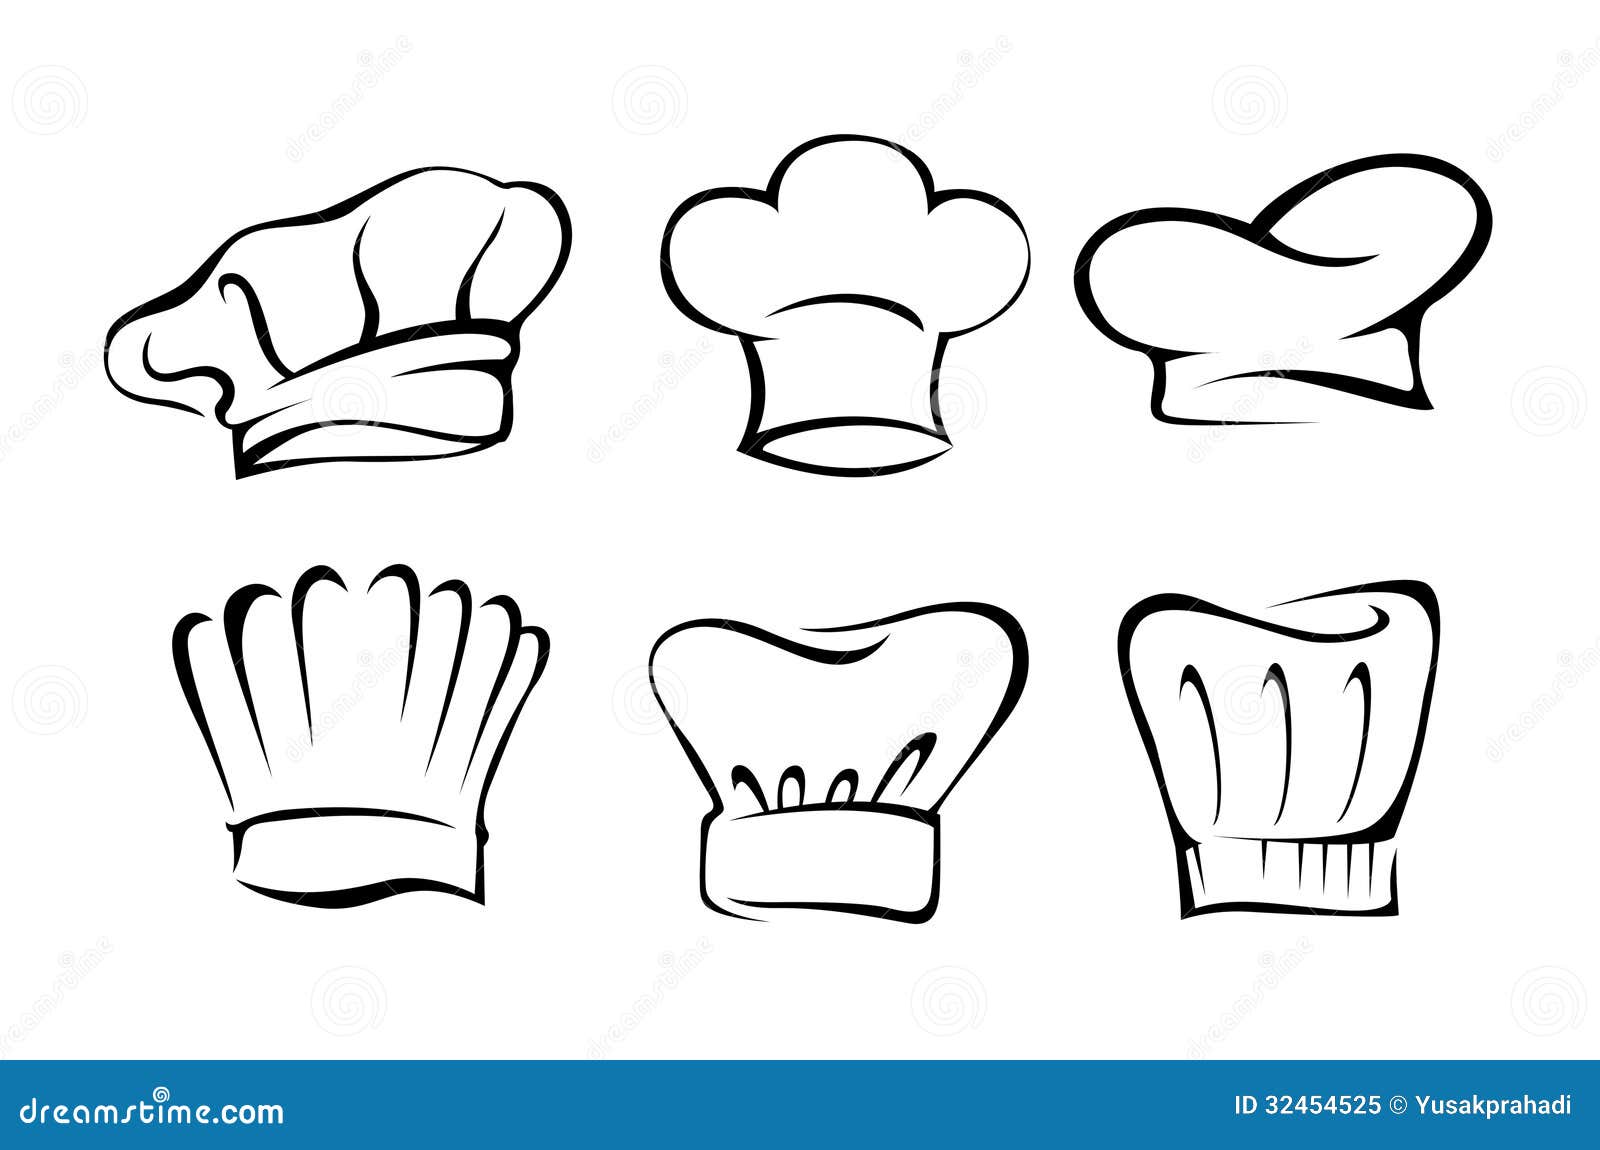 chef hat clipart download - photo #26